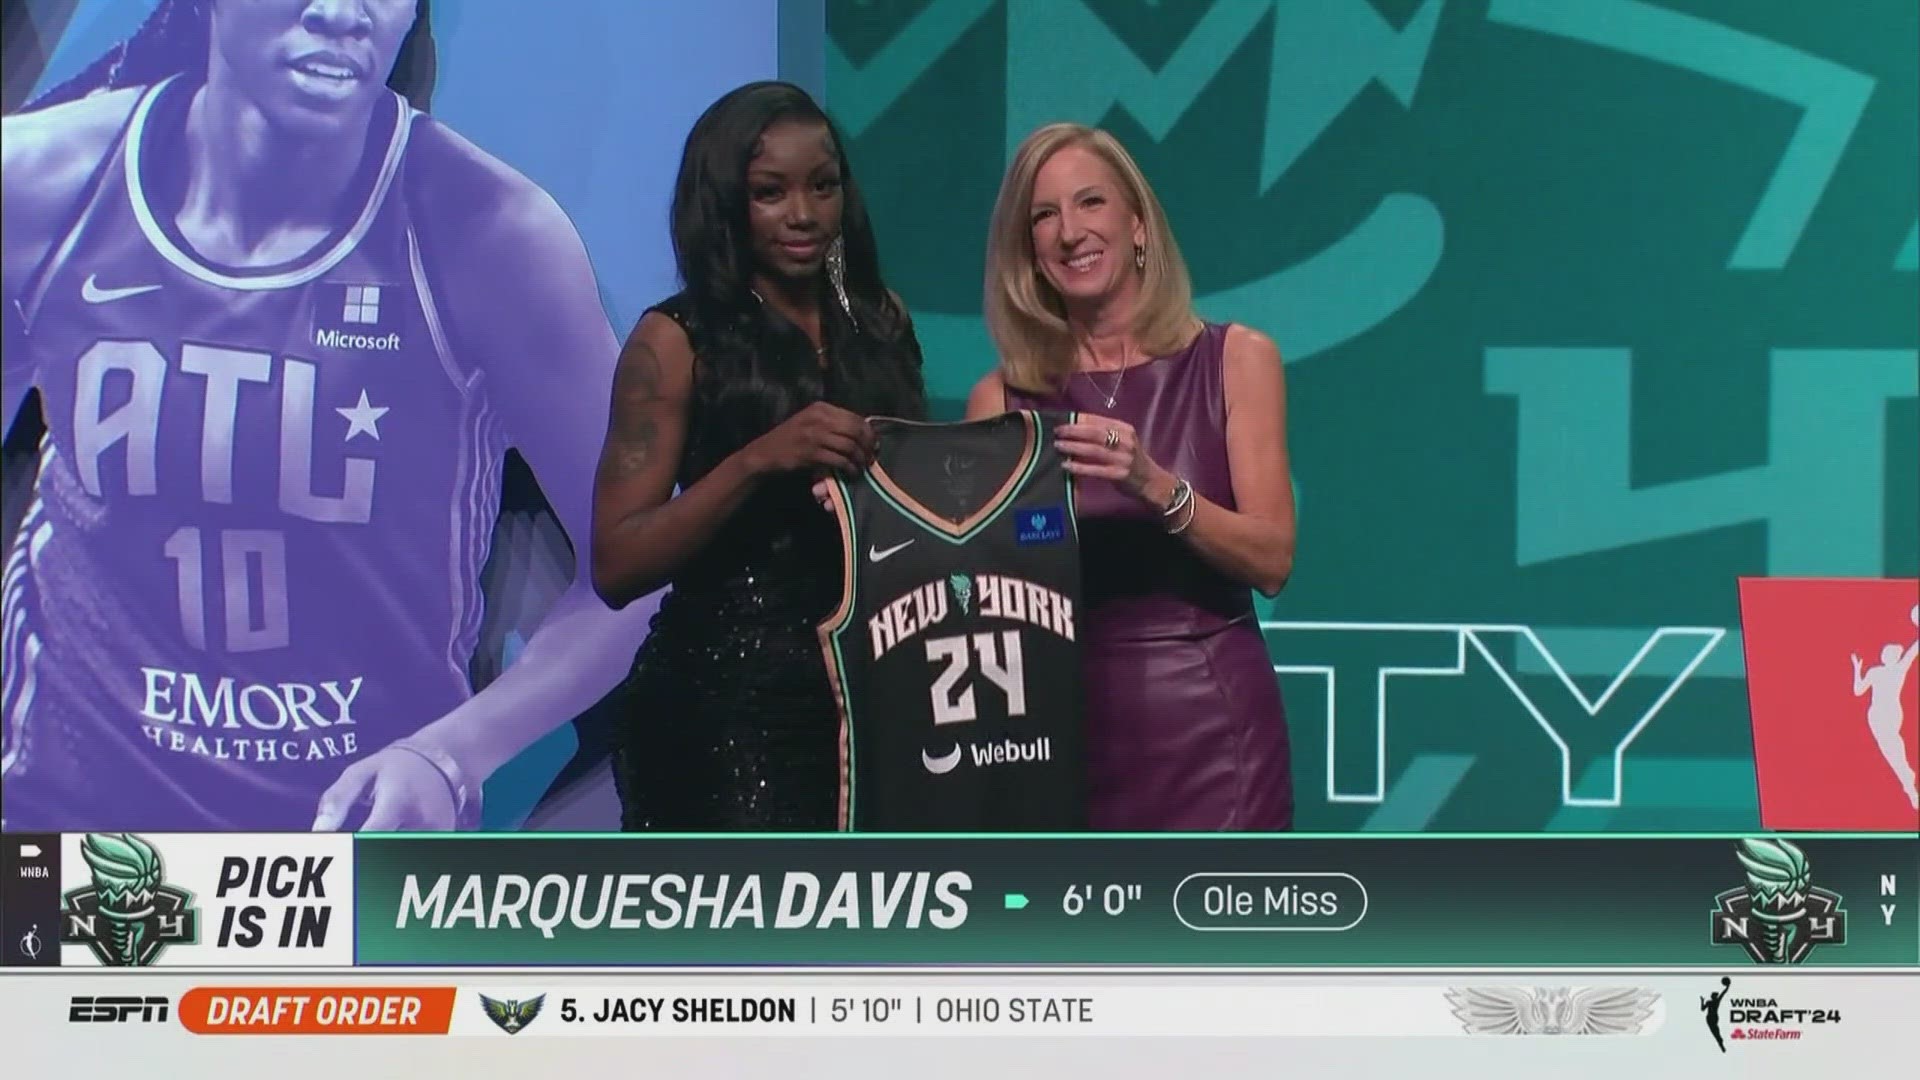 Springdale High School alum Marquesha Davis was drafted 11th overall to the New York Liberty.